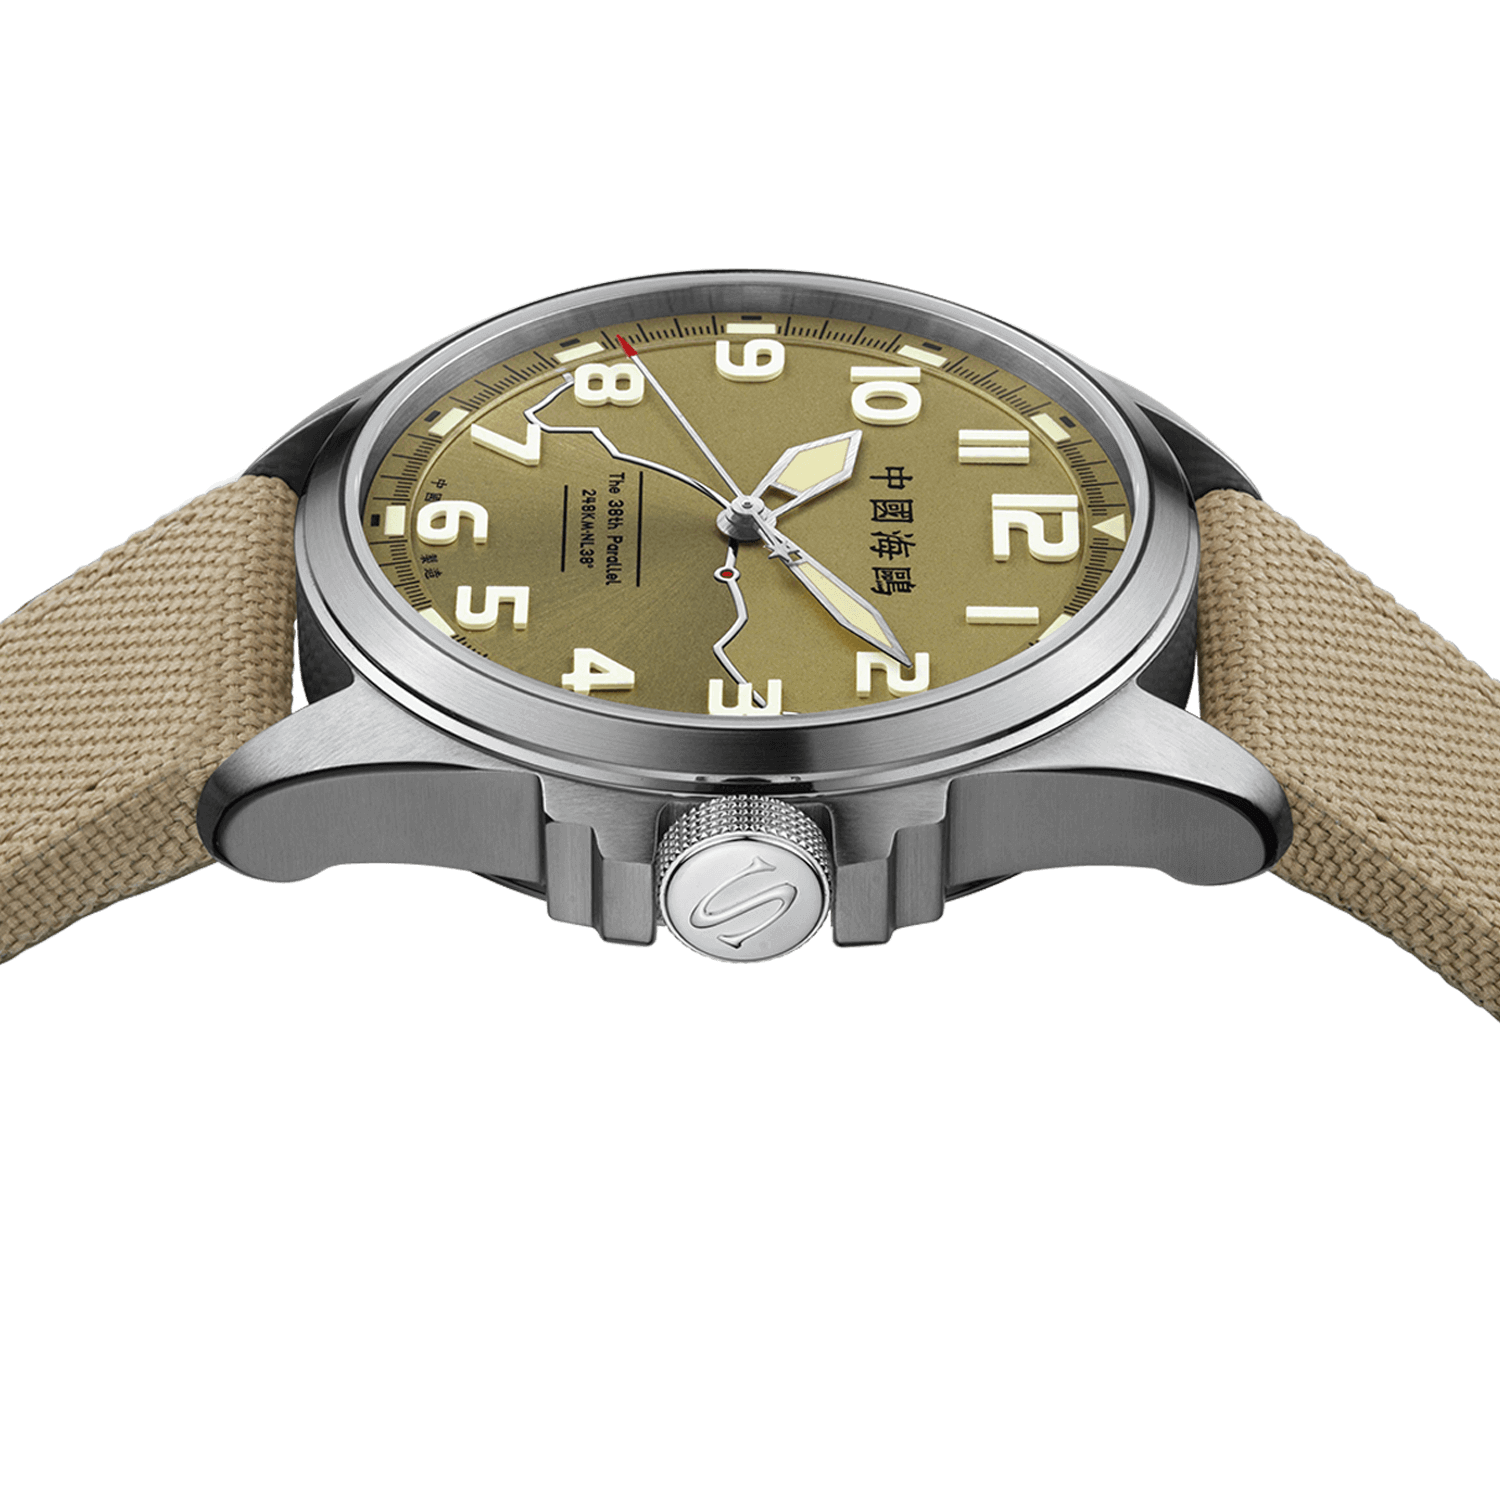 Seagull Watch | Military Watch "The Battle at Lake Changjin" Limited Edition 43mm